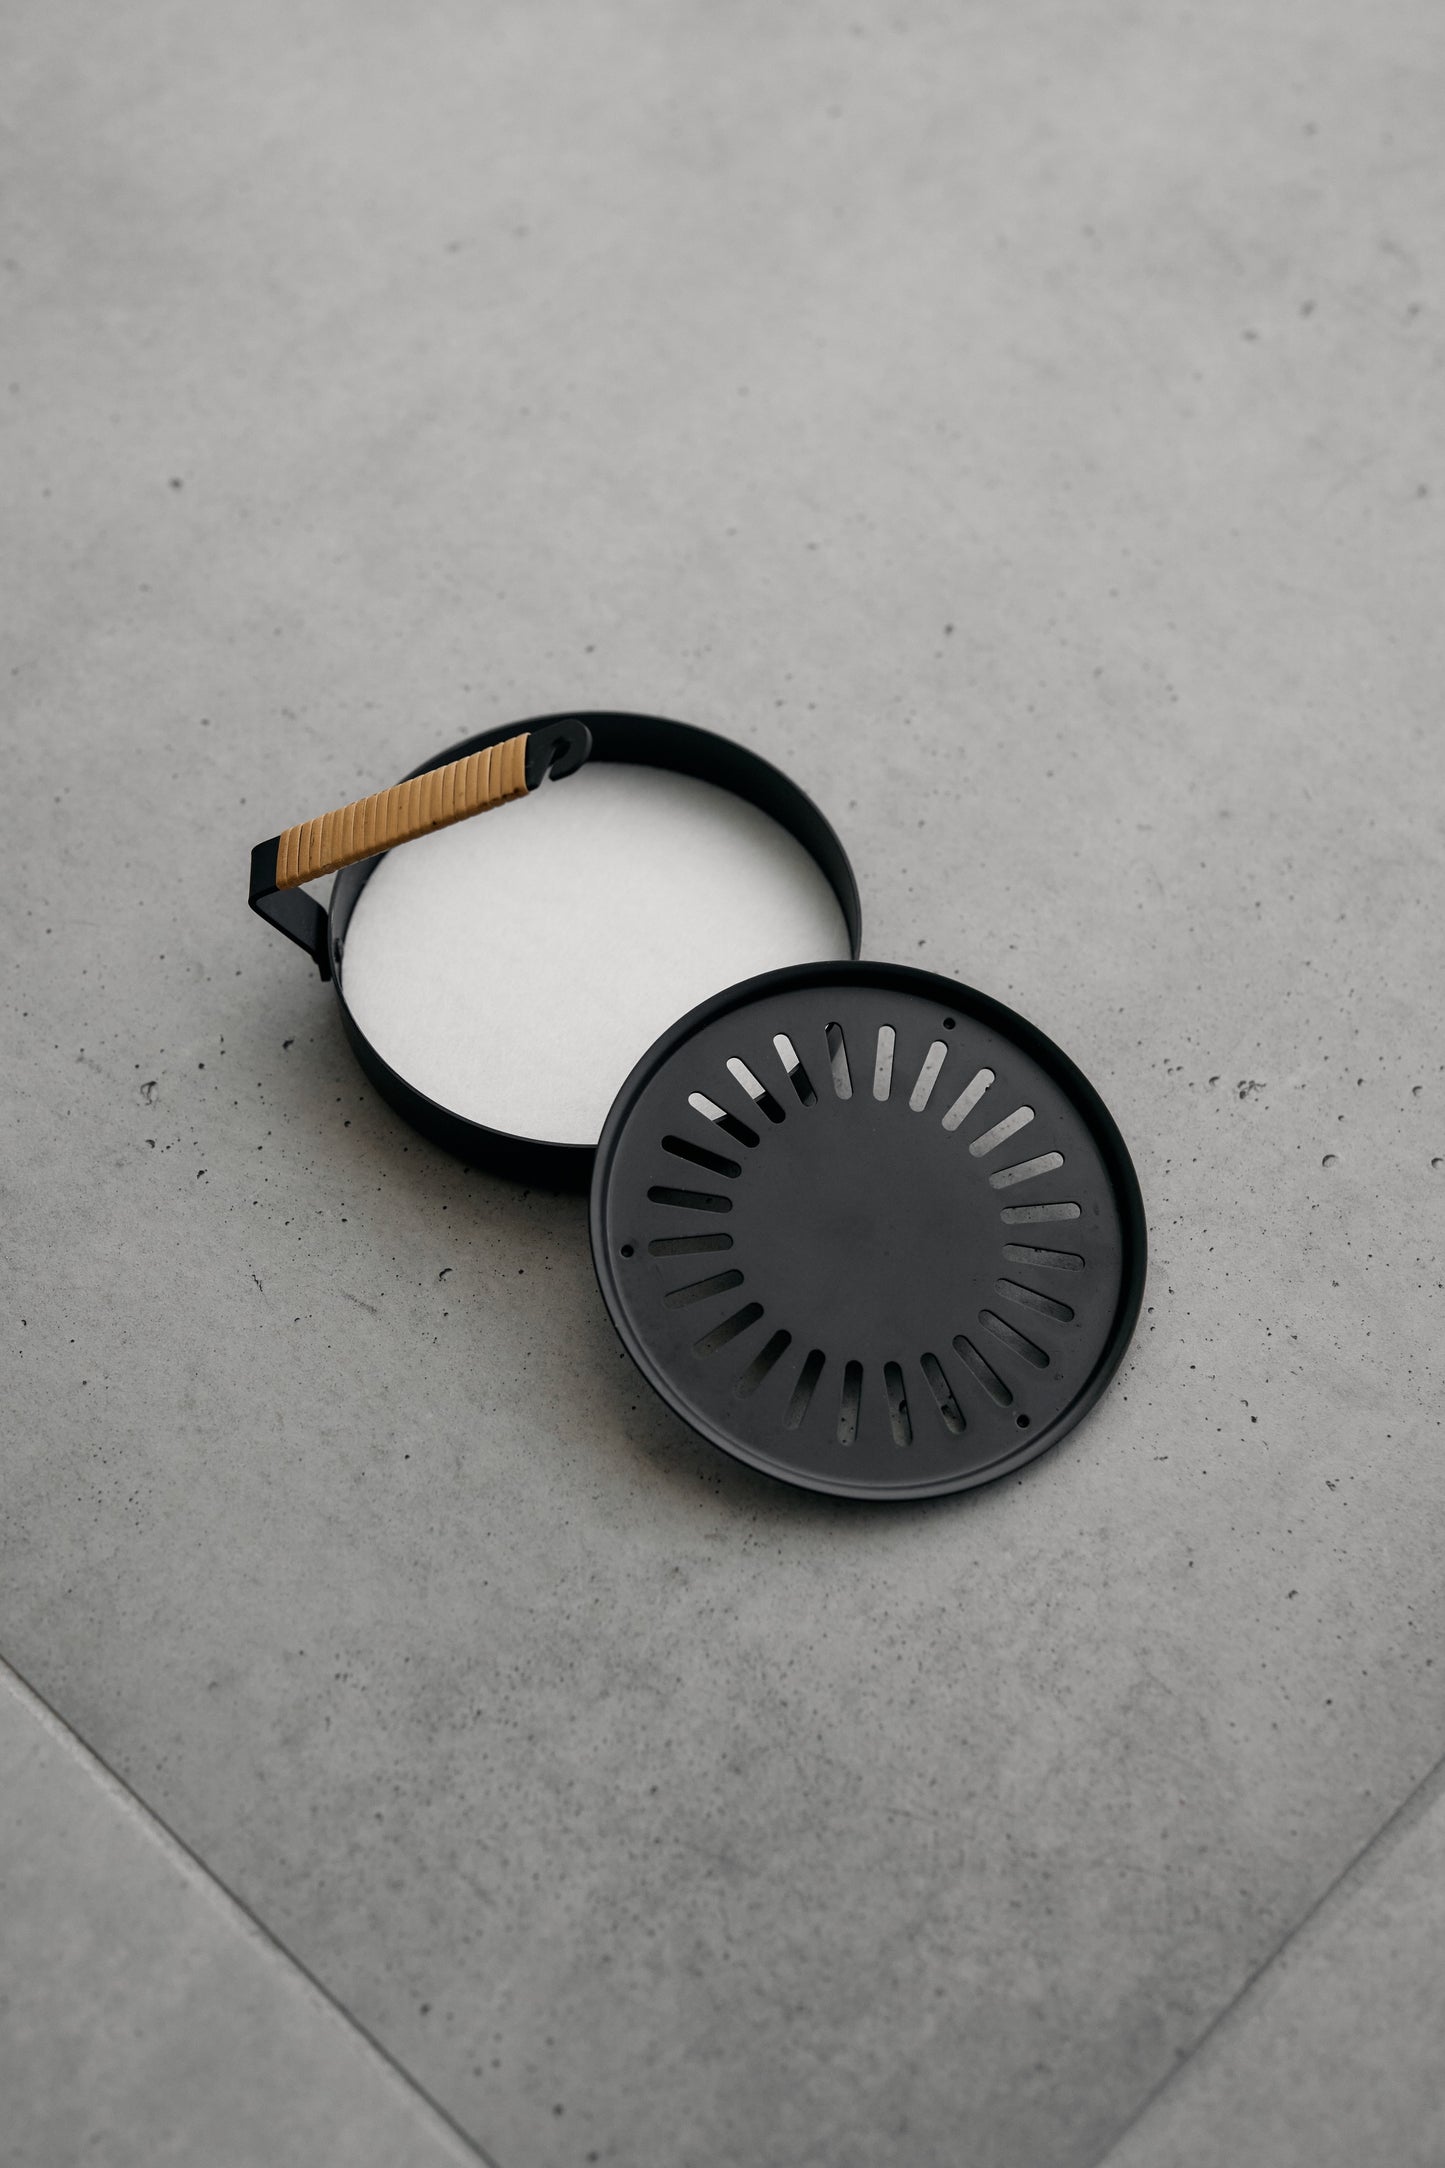 STYLE JAPAN for wanderout/ Mosquito Coil Holder “Kayari”